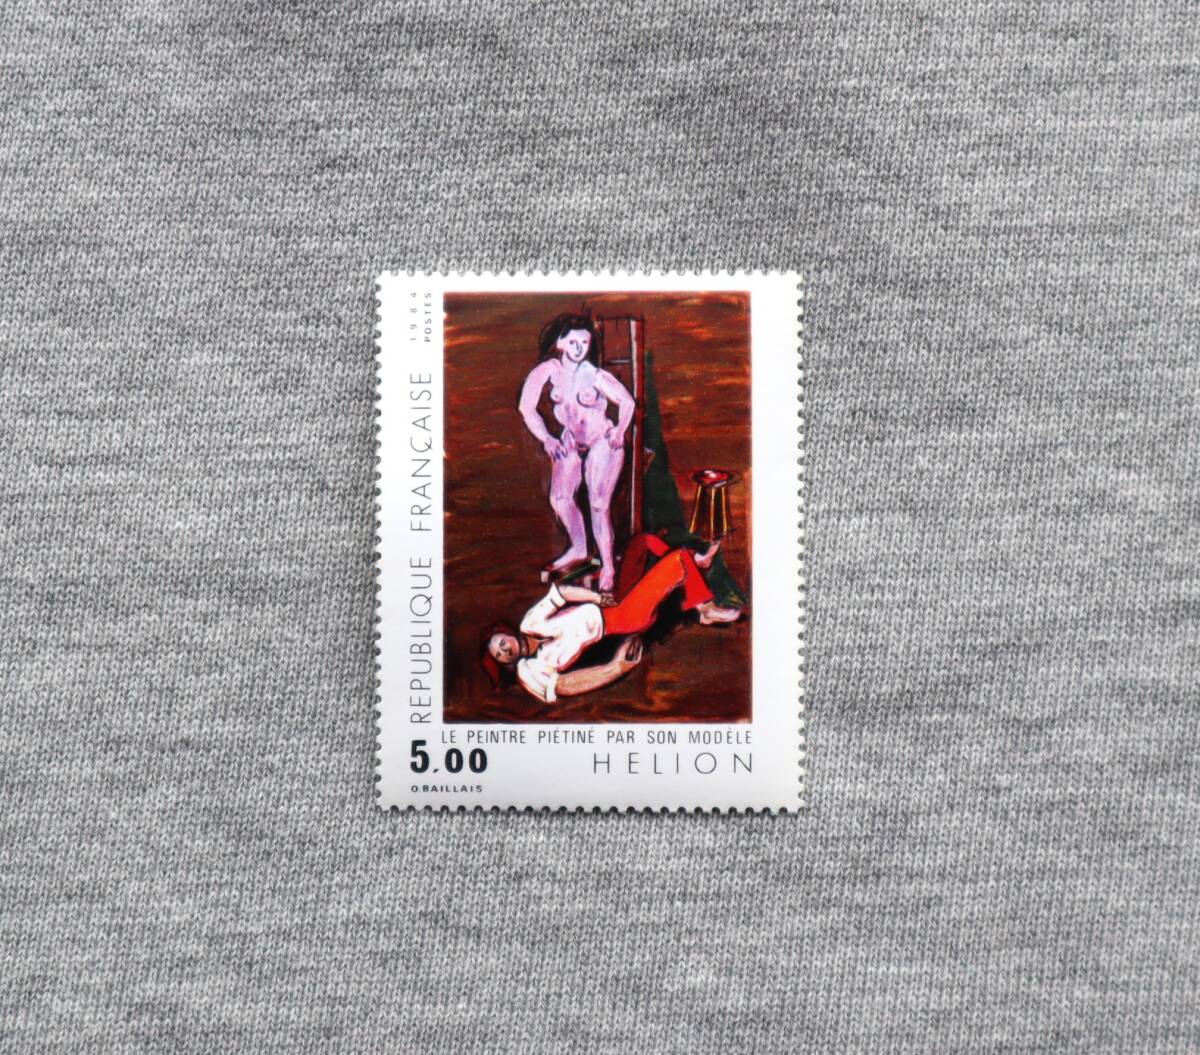 E53 France 1984 year fine art stamp Aerio n[ model ... attaching ... painter ] 1 kind single one-side stamp 1 sheets 